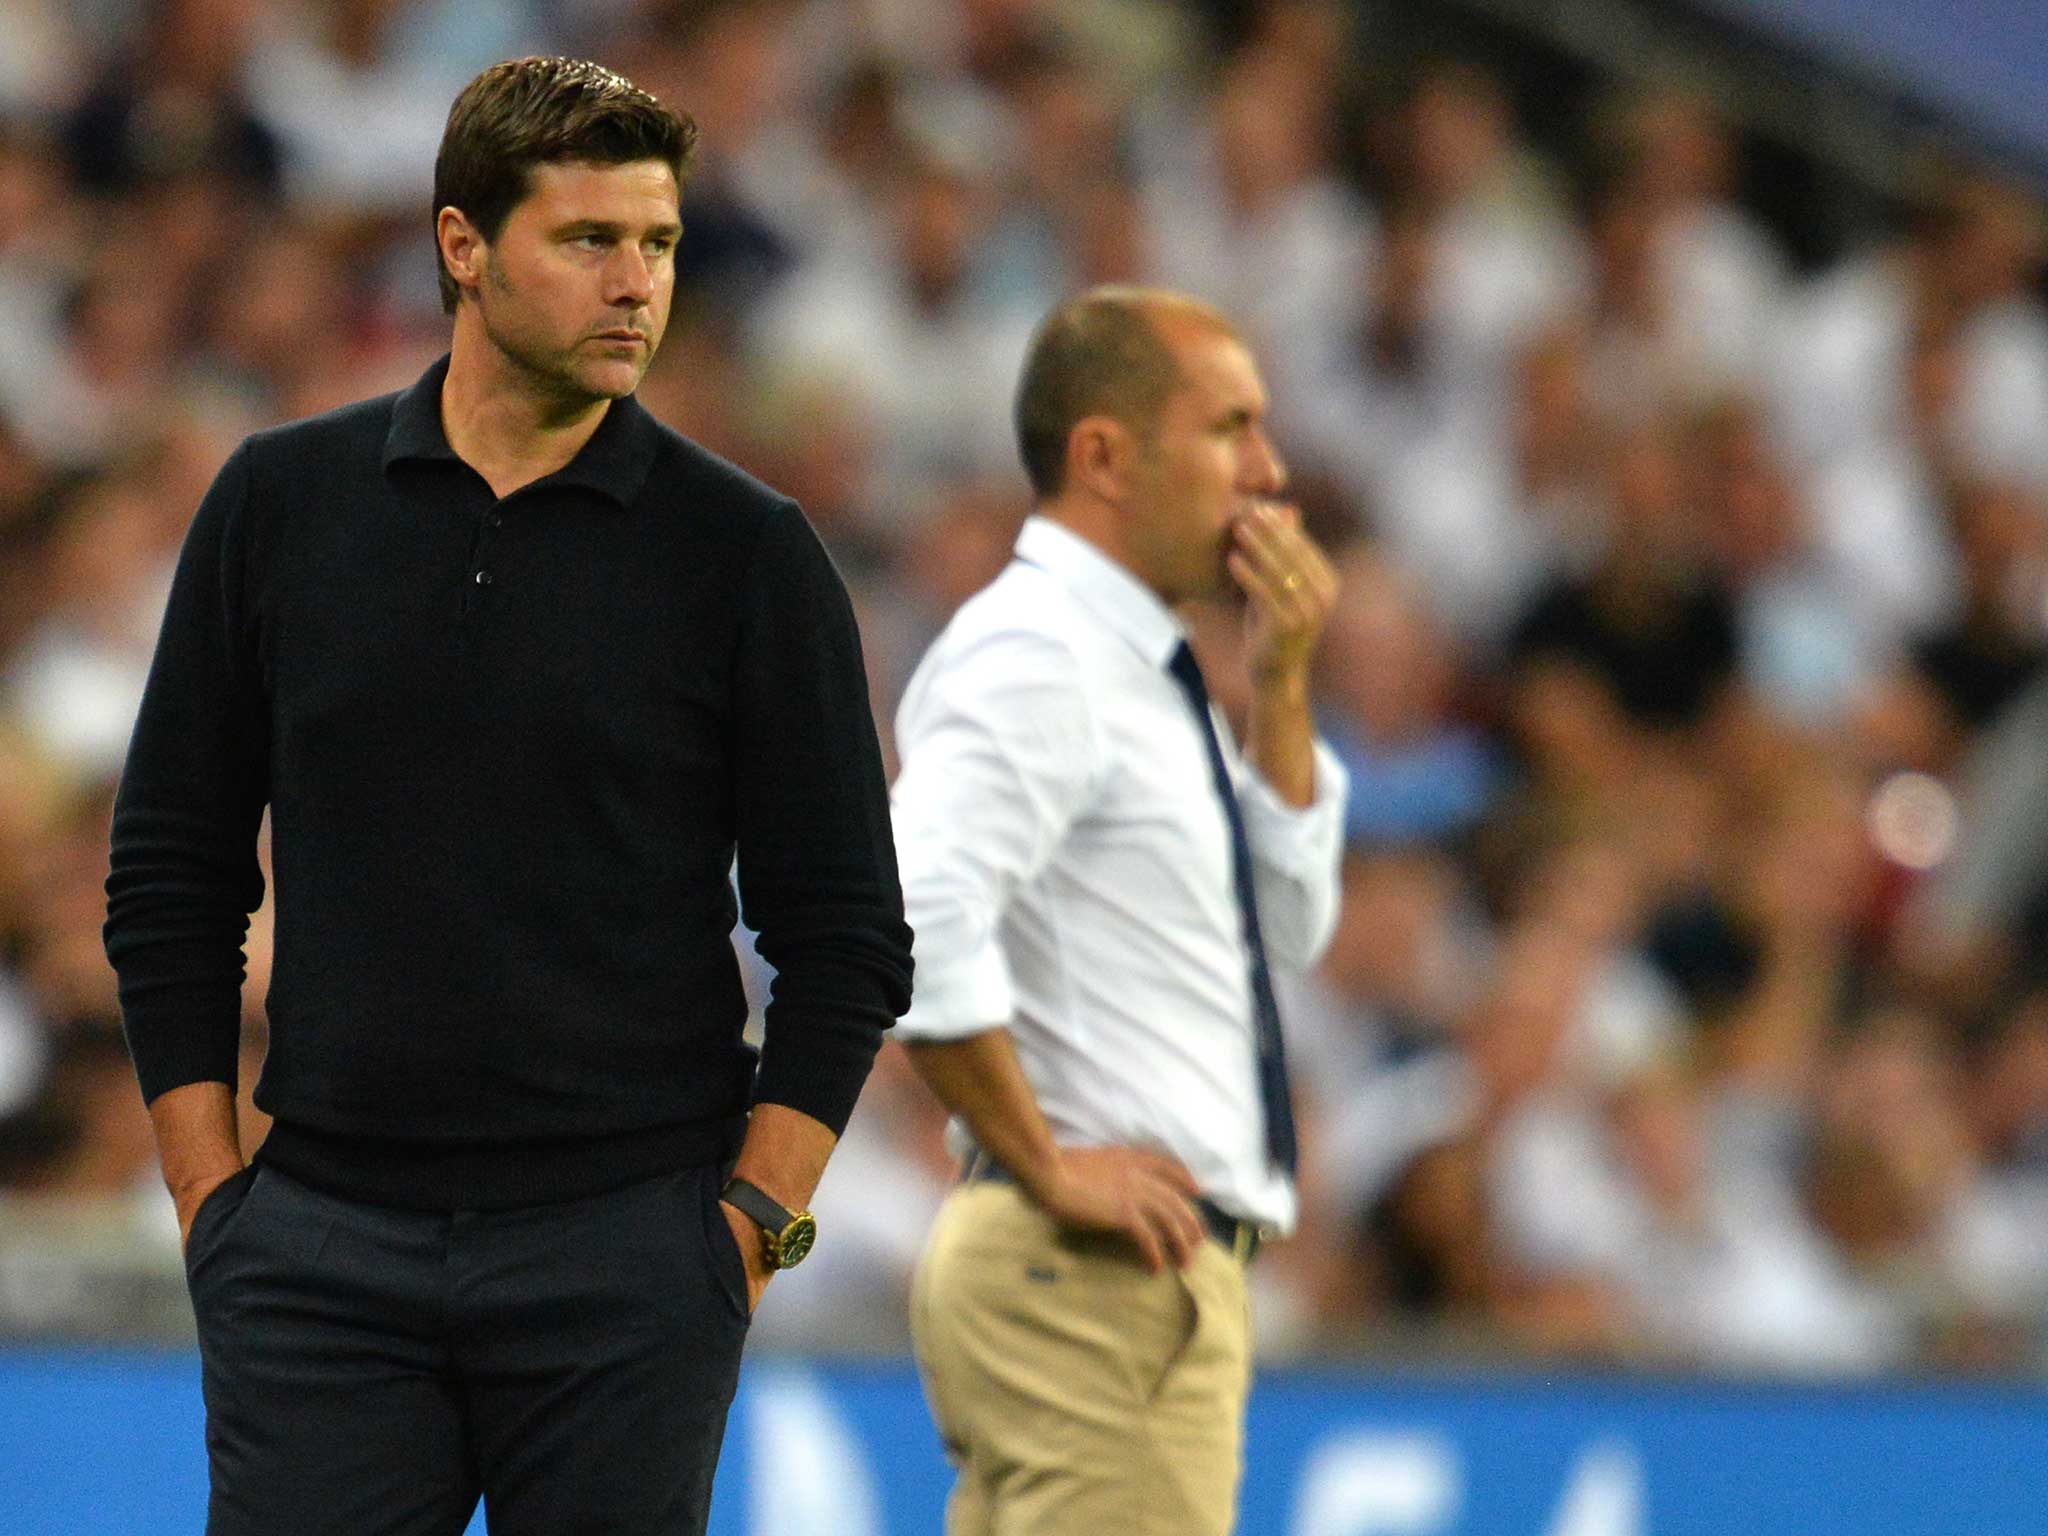 Mauricio Pochettino cut an unhappy figure on the sidelines at Wembley